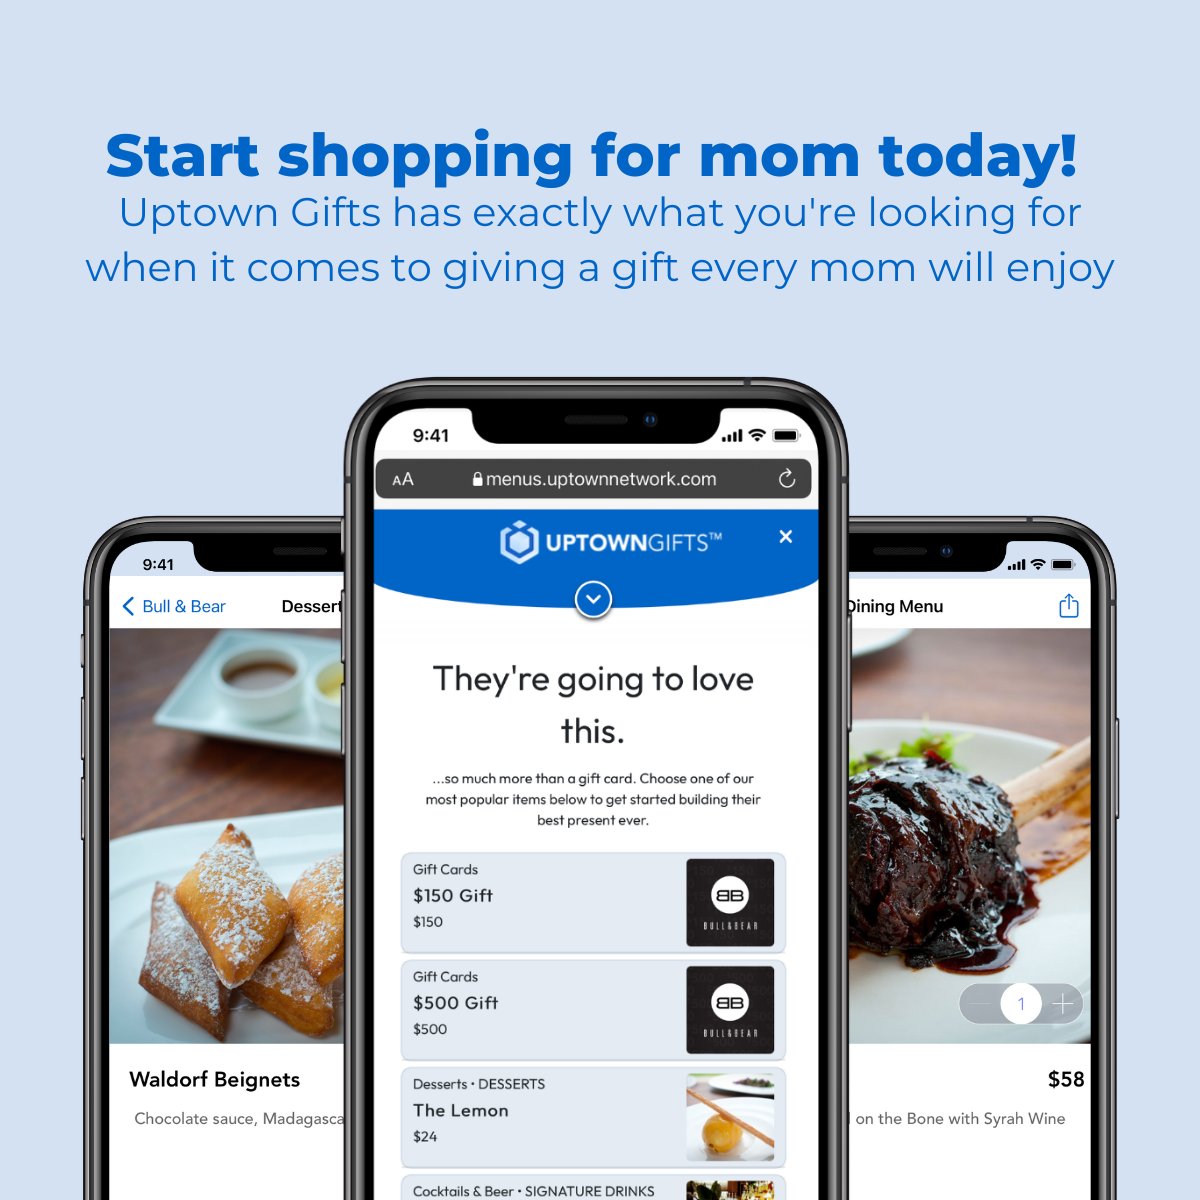 Make mom’s day with a gift she’ll love! Browse Uptown Gifts today for the perfect virtual gift card for Mother’s Day: vist.ly/yji8 

#FoodAndBeverage #QRCode #HospitalityIndustry #Restaurants #Innovation #RedefineHospitality #Sustainability #Trending